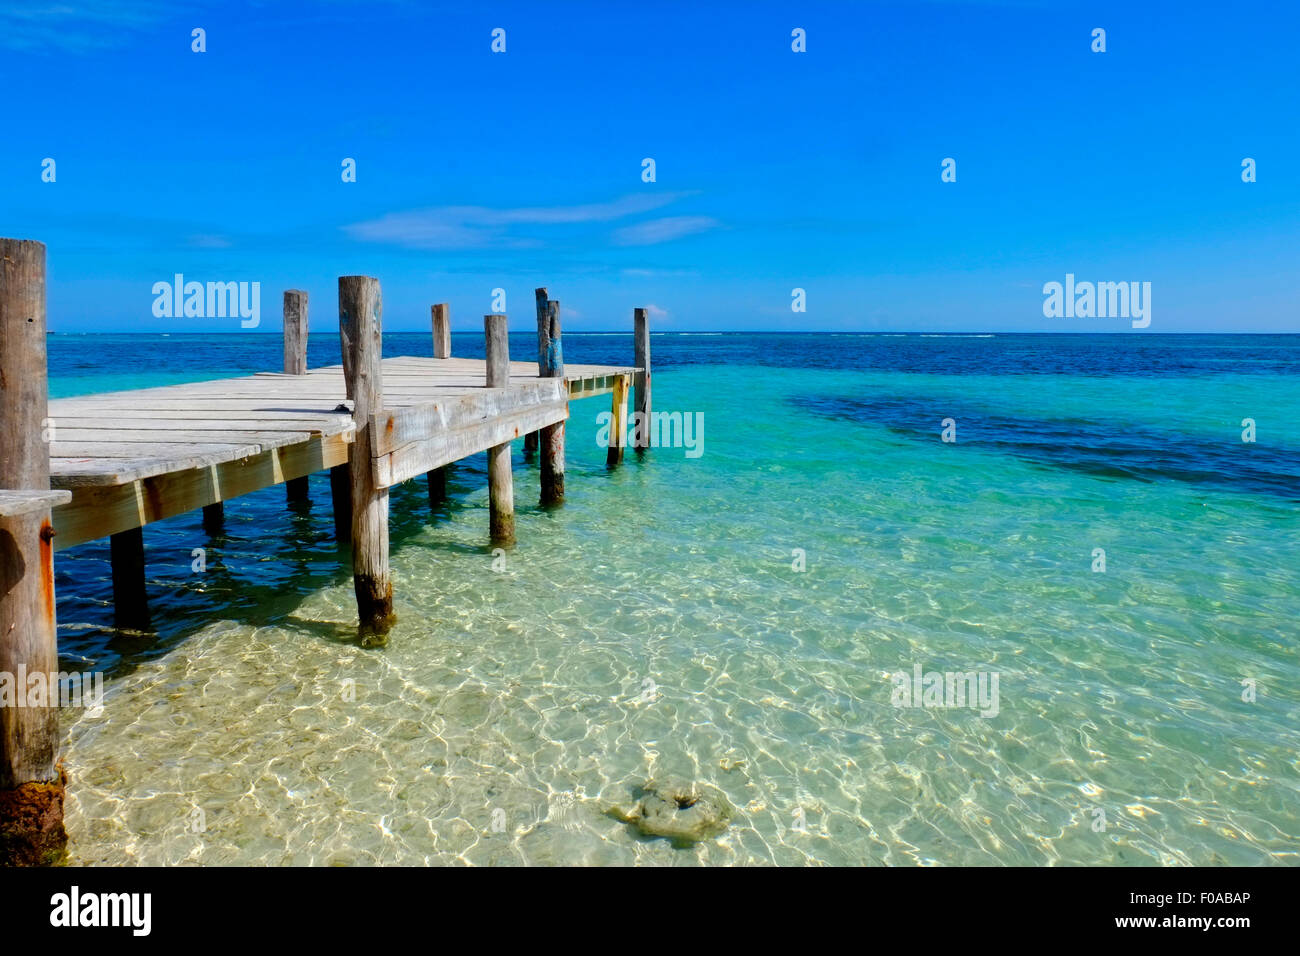 CARIBBEAN WOODEN TRADITIONAL JETTY Stock Photo